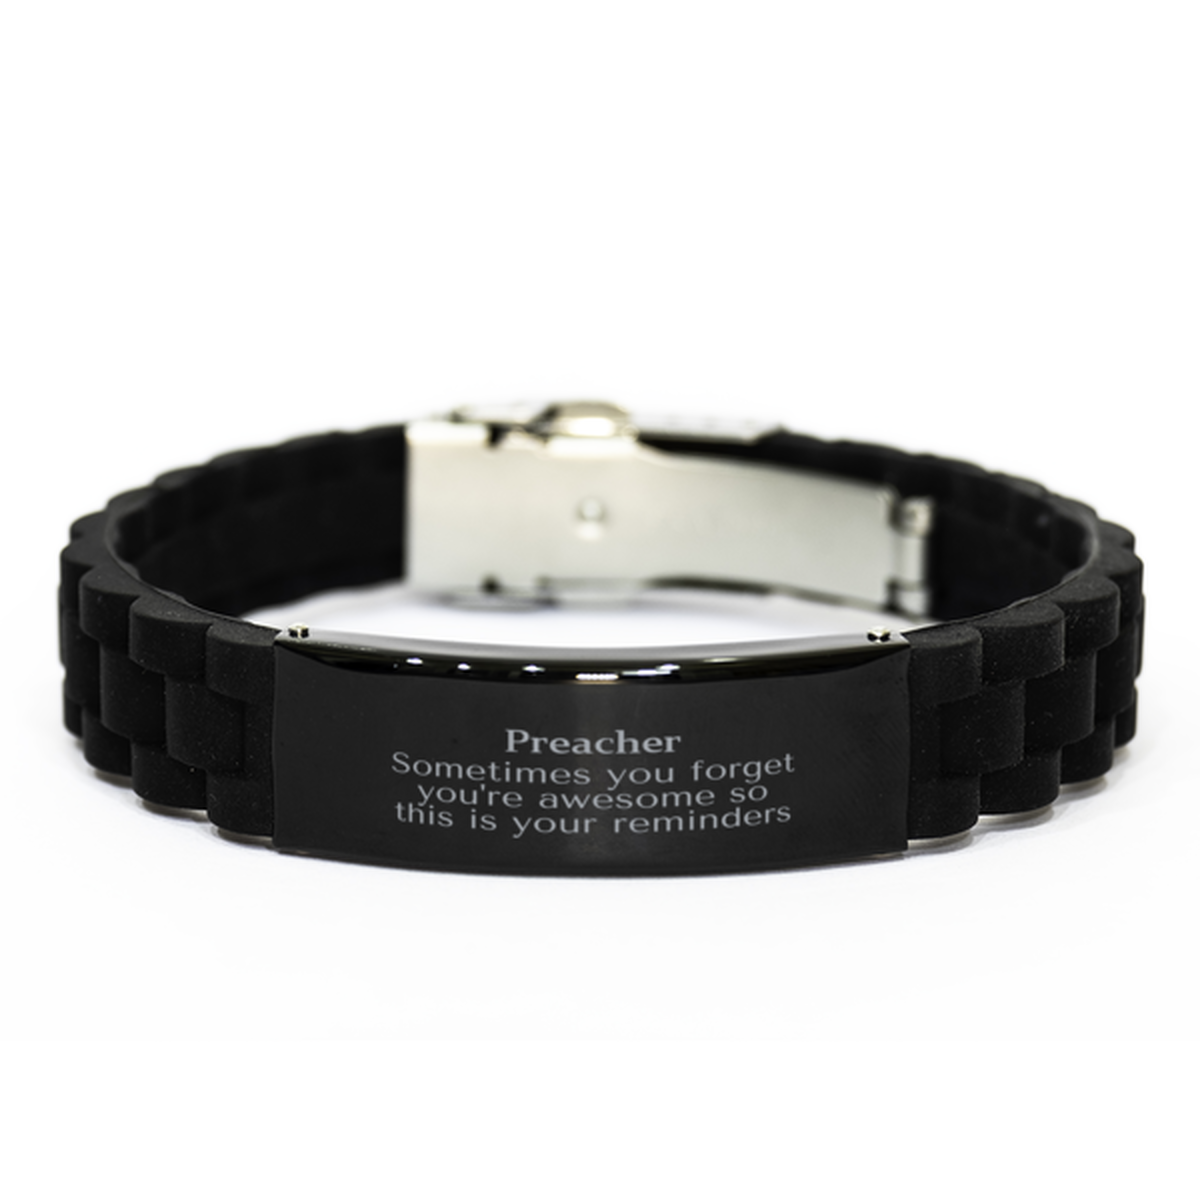 Sentimental Preacher Black Glidelock Clasp Bracelet, Preacher Sometimes you forget you're awesome so this is your reminders, Graduation Christmas Birthday Gifts for Preacher, Men, Women, Coworkers